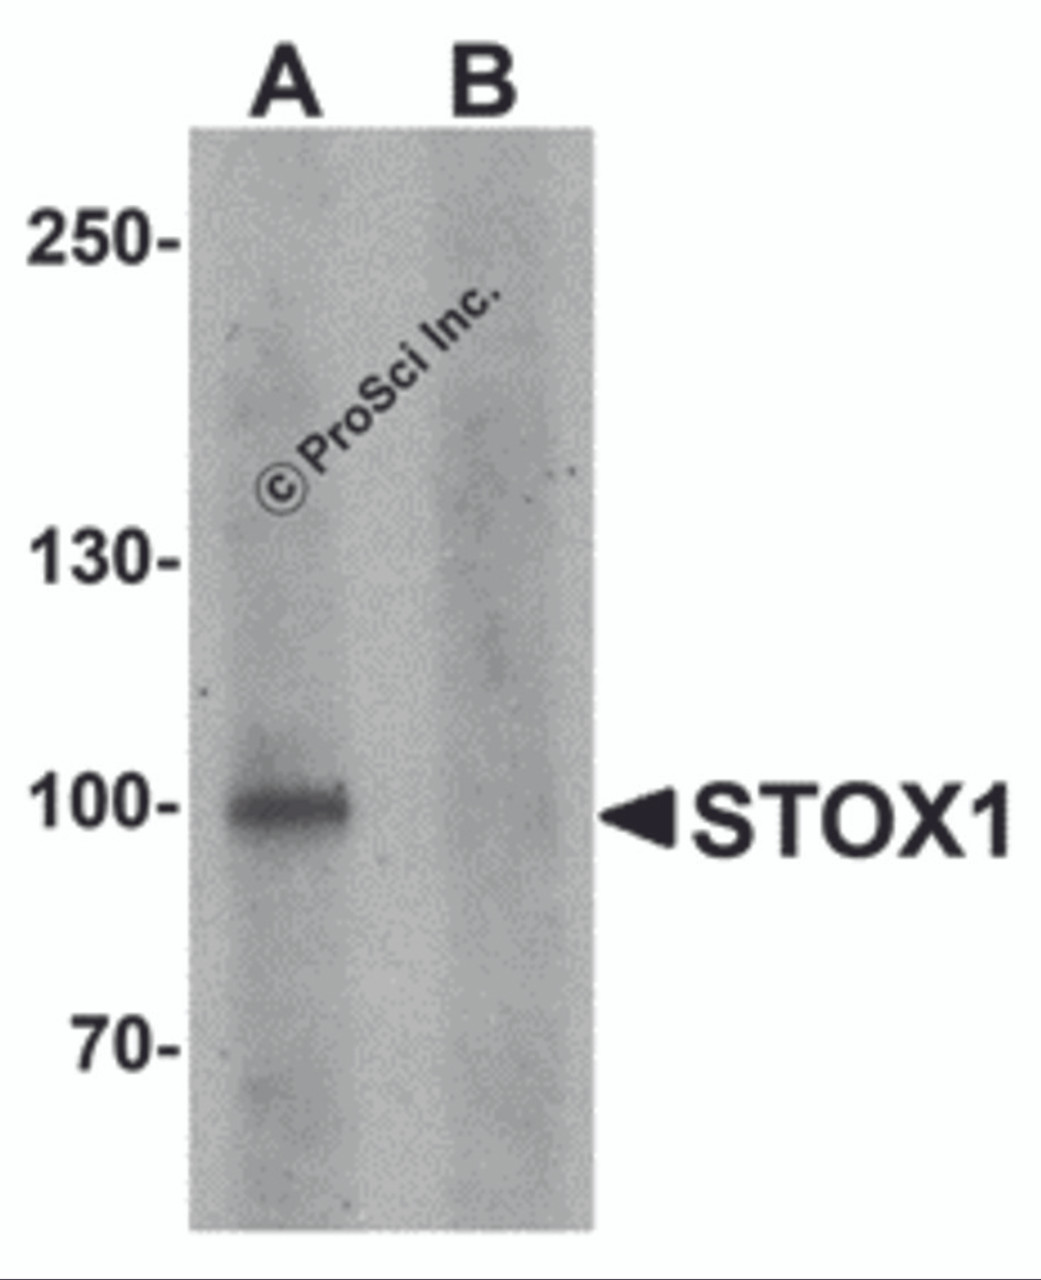 Western blot analysis of STOX1 in human liver tissue lysate with STOX1 antibody at 1 &#956;g/ml in (A) the absence and (B) the presence of blocking peptide.